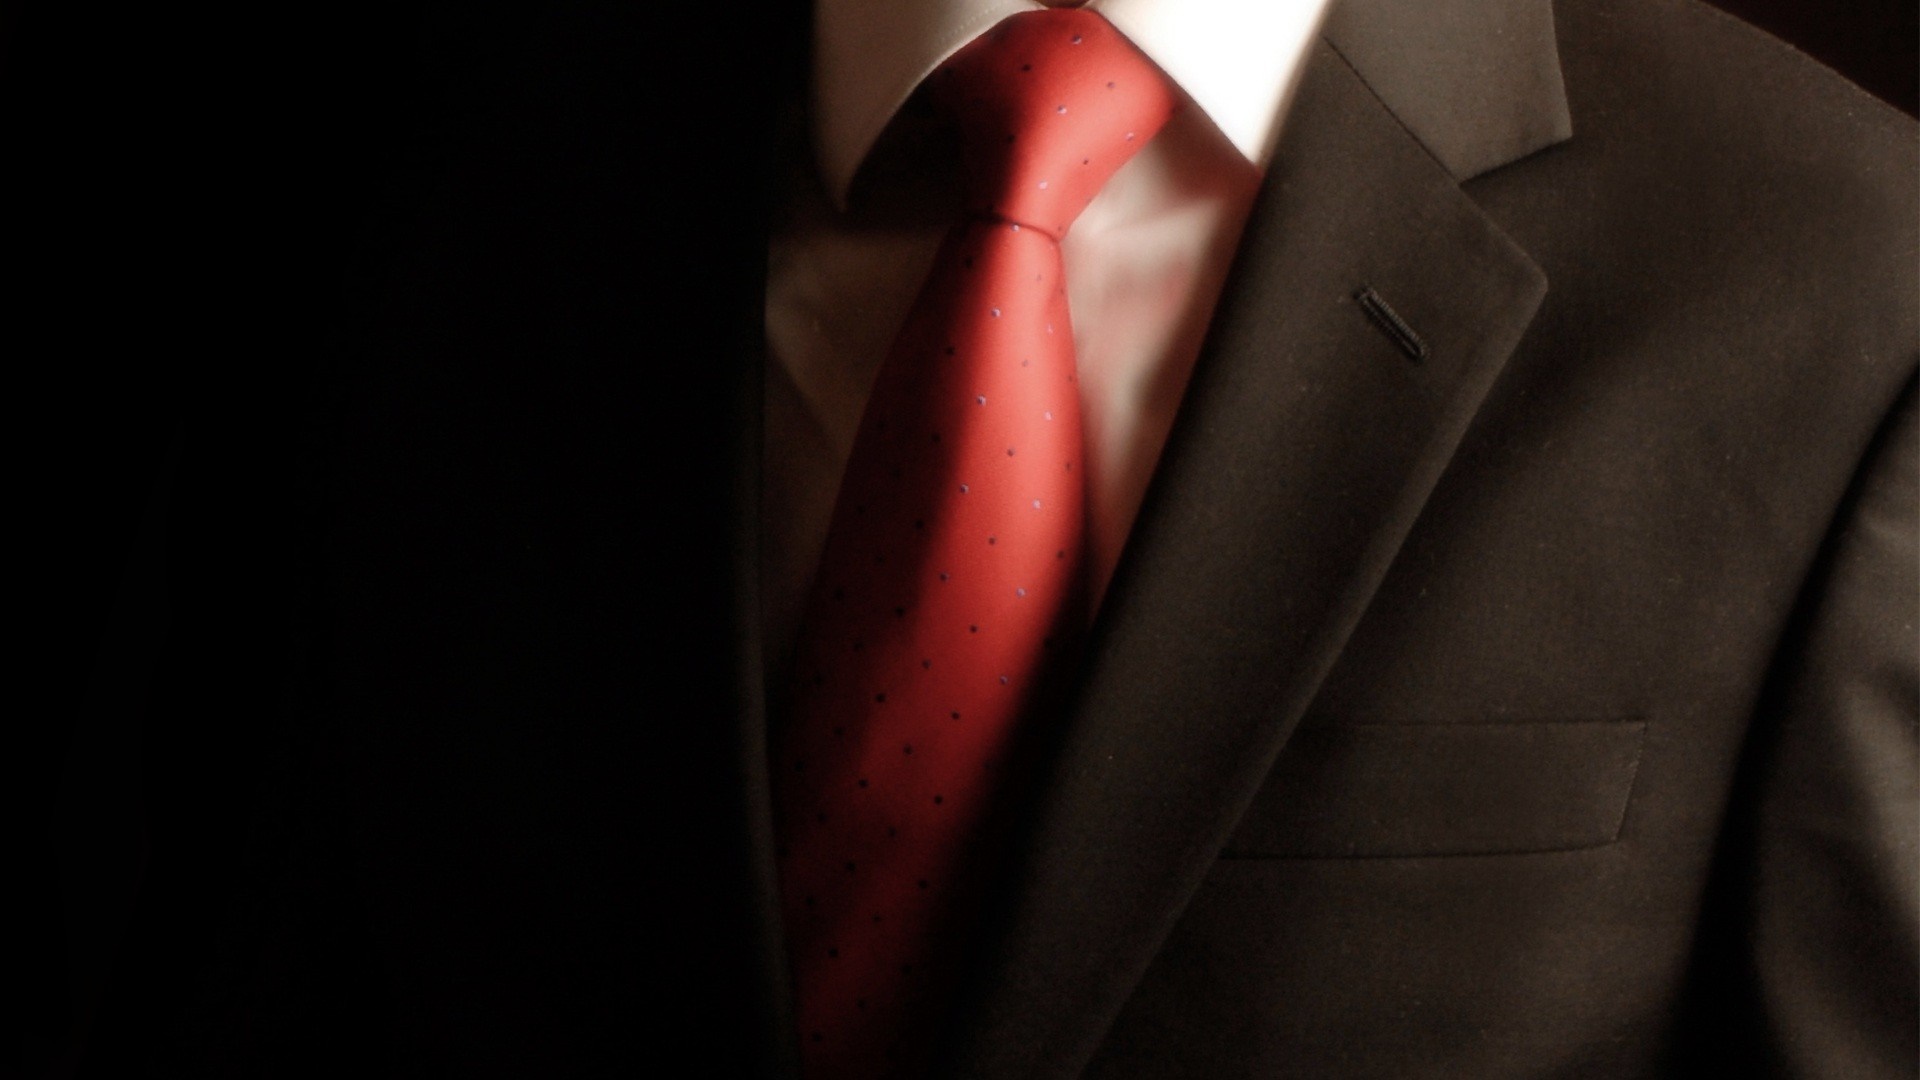 red, Hitman, clothing, color, hand, suit, arm, close up, formal wear Gallery HD Wallpaper